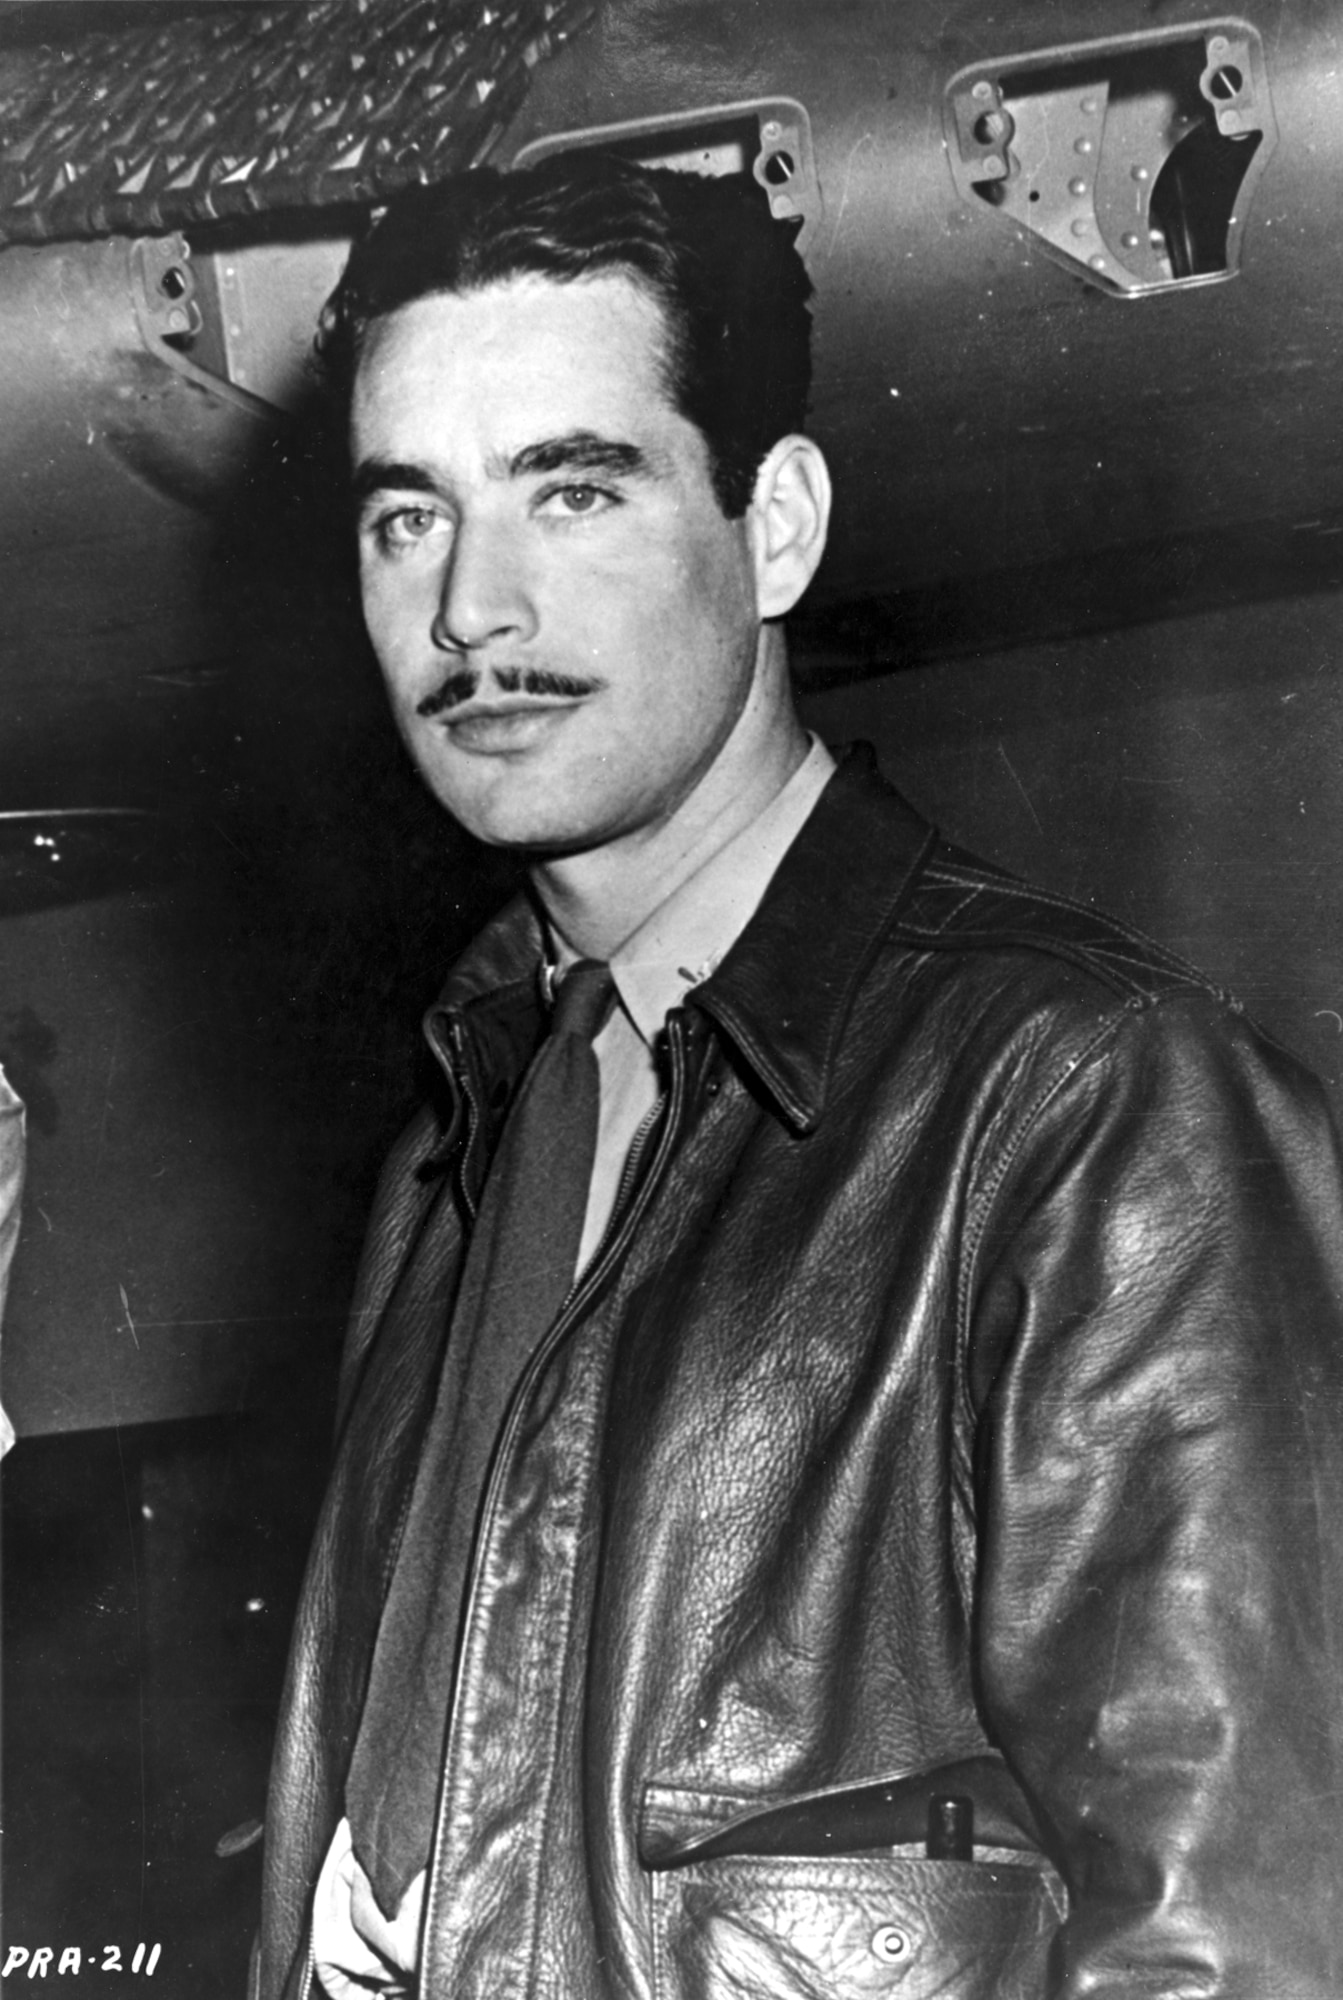 Lt. Boyd D. "Buzz" Wagner, Commanding Officer of the 17th Pursuit Squadron in the Philippines, was the first AAF ace of World War II. (U.S. Air Force photo)